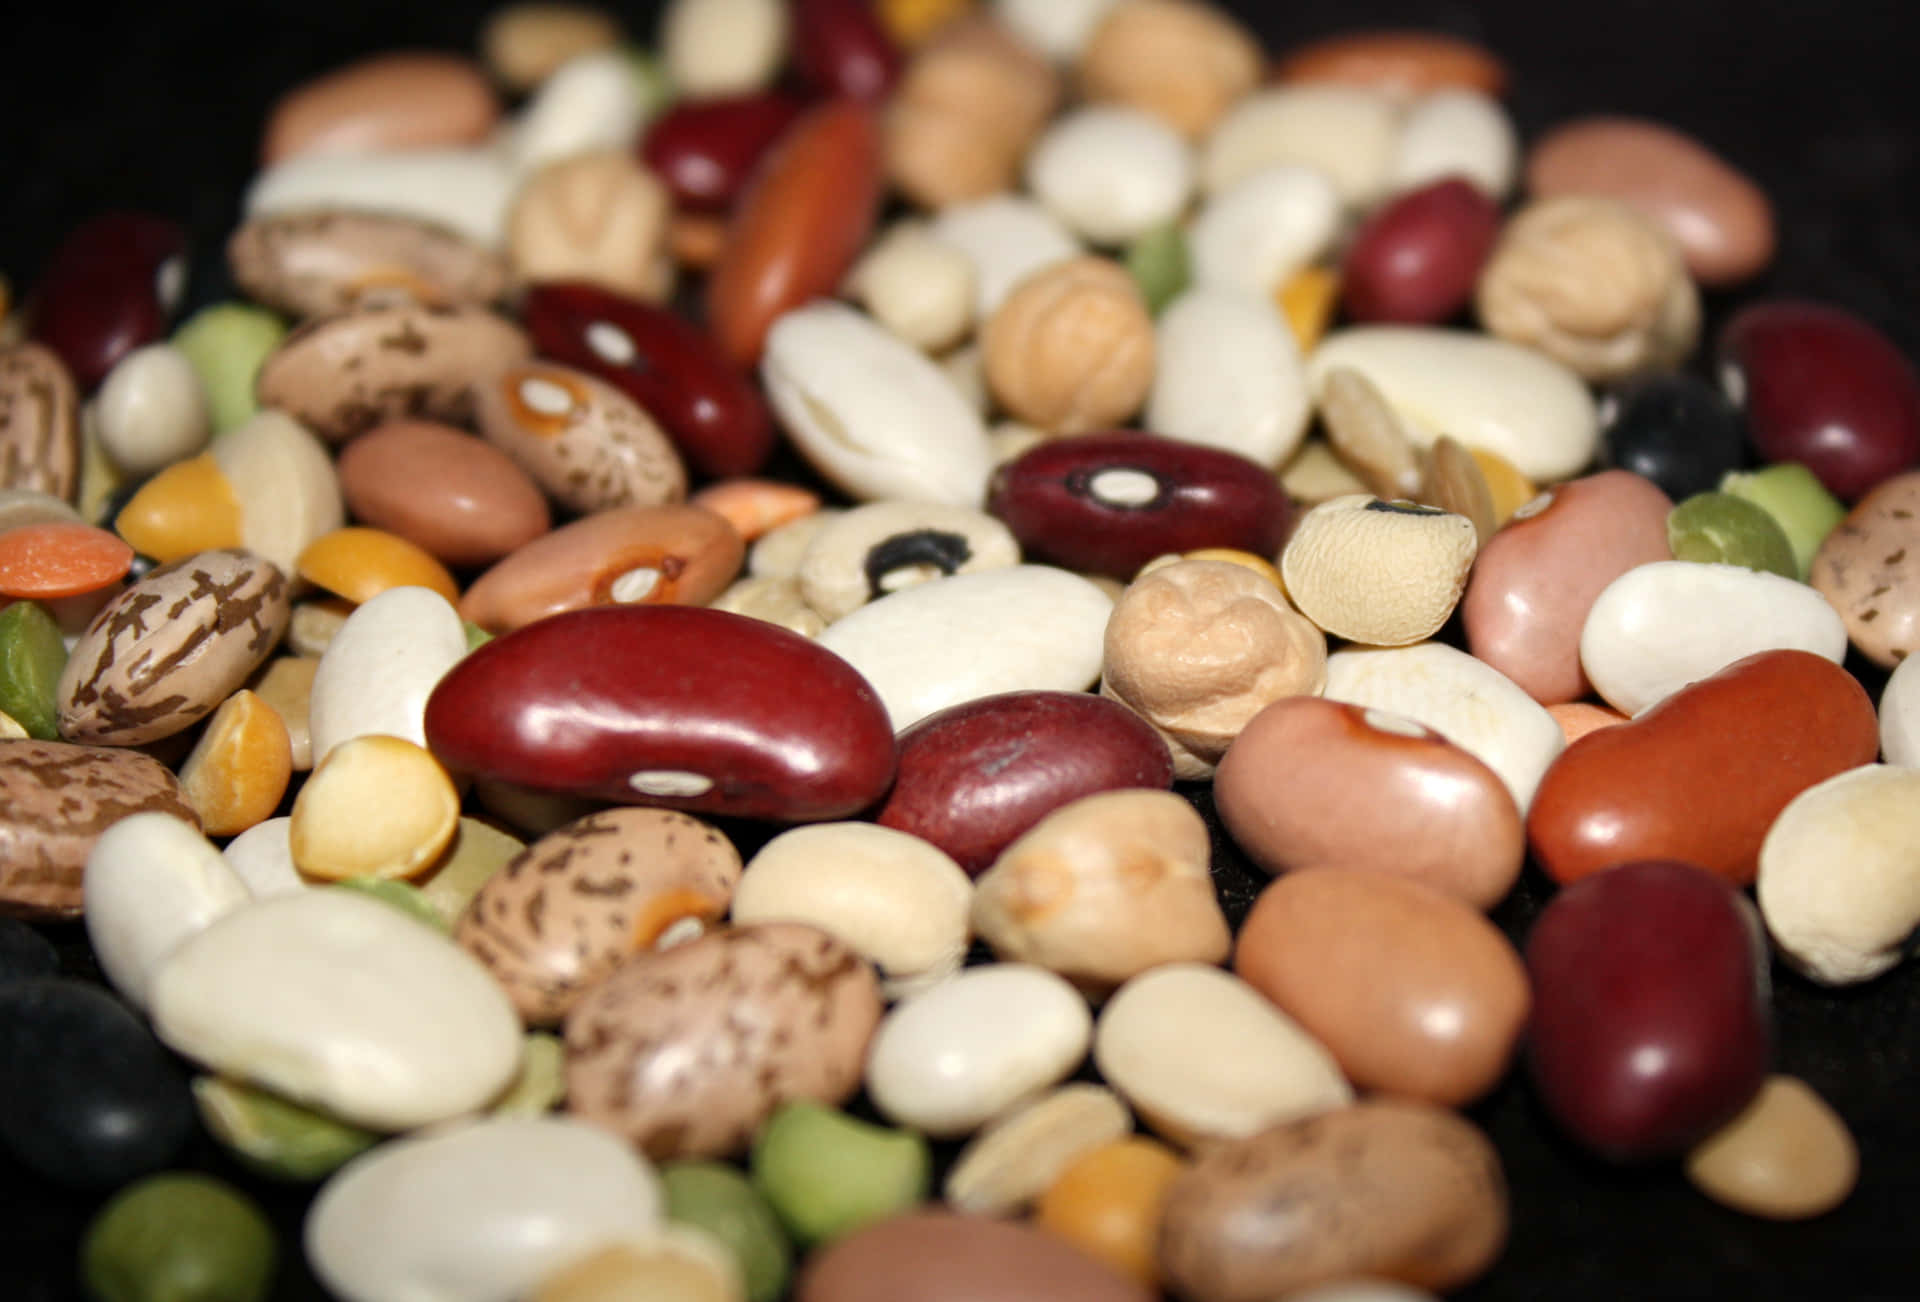 A variety of delicious and colorful beans for a tasty meal"